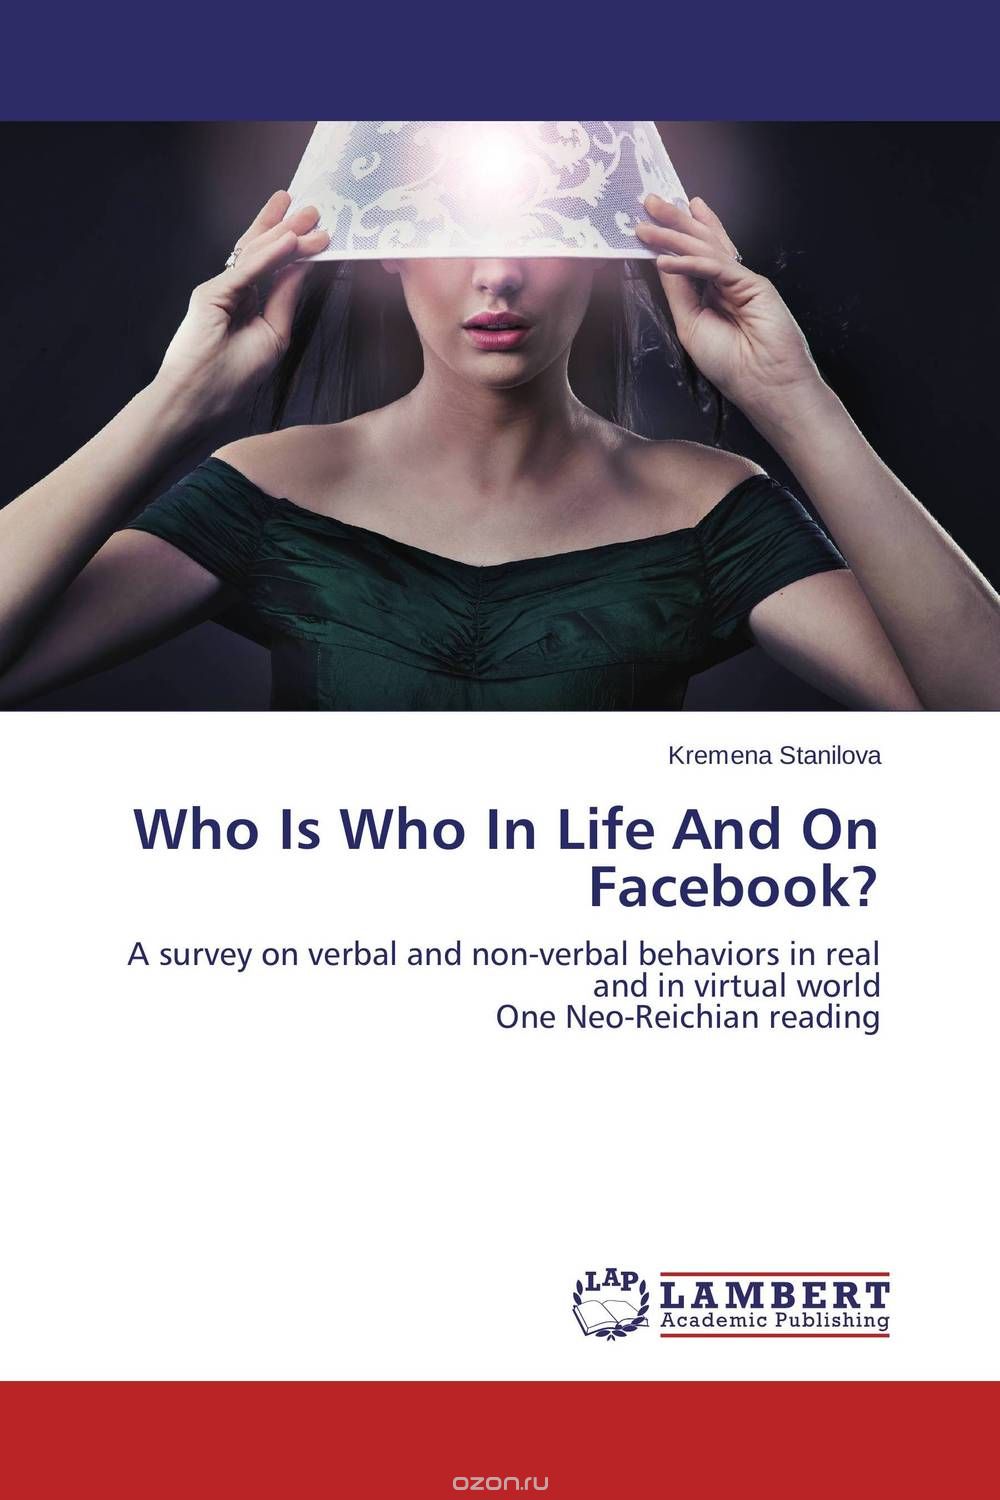 Скачать книгу "Who Is Who In Life And On Facebook?"